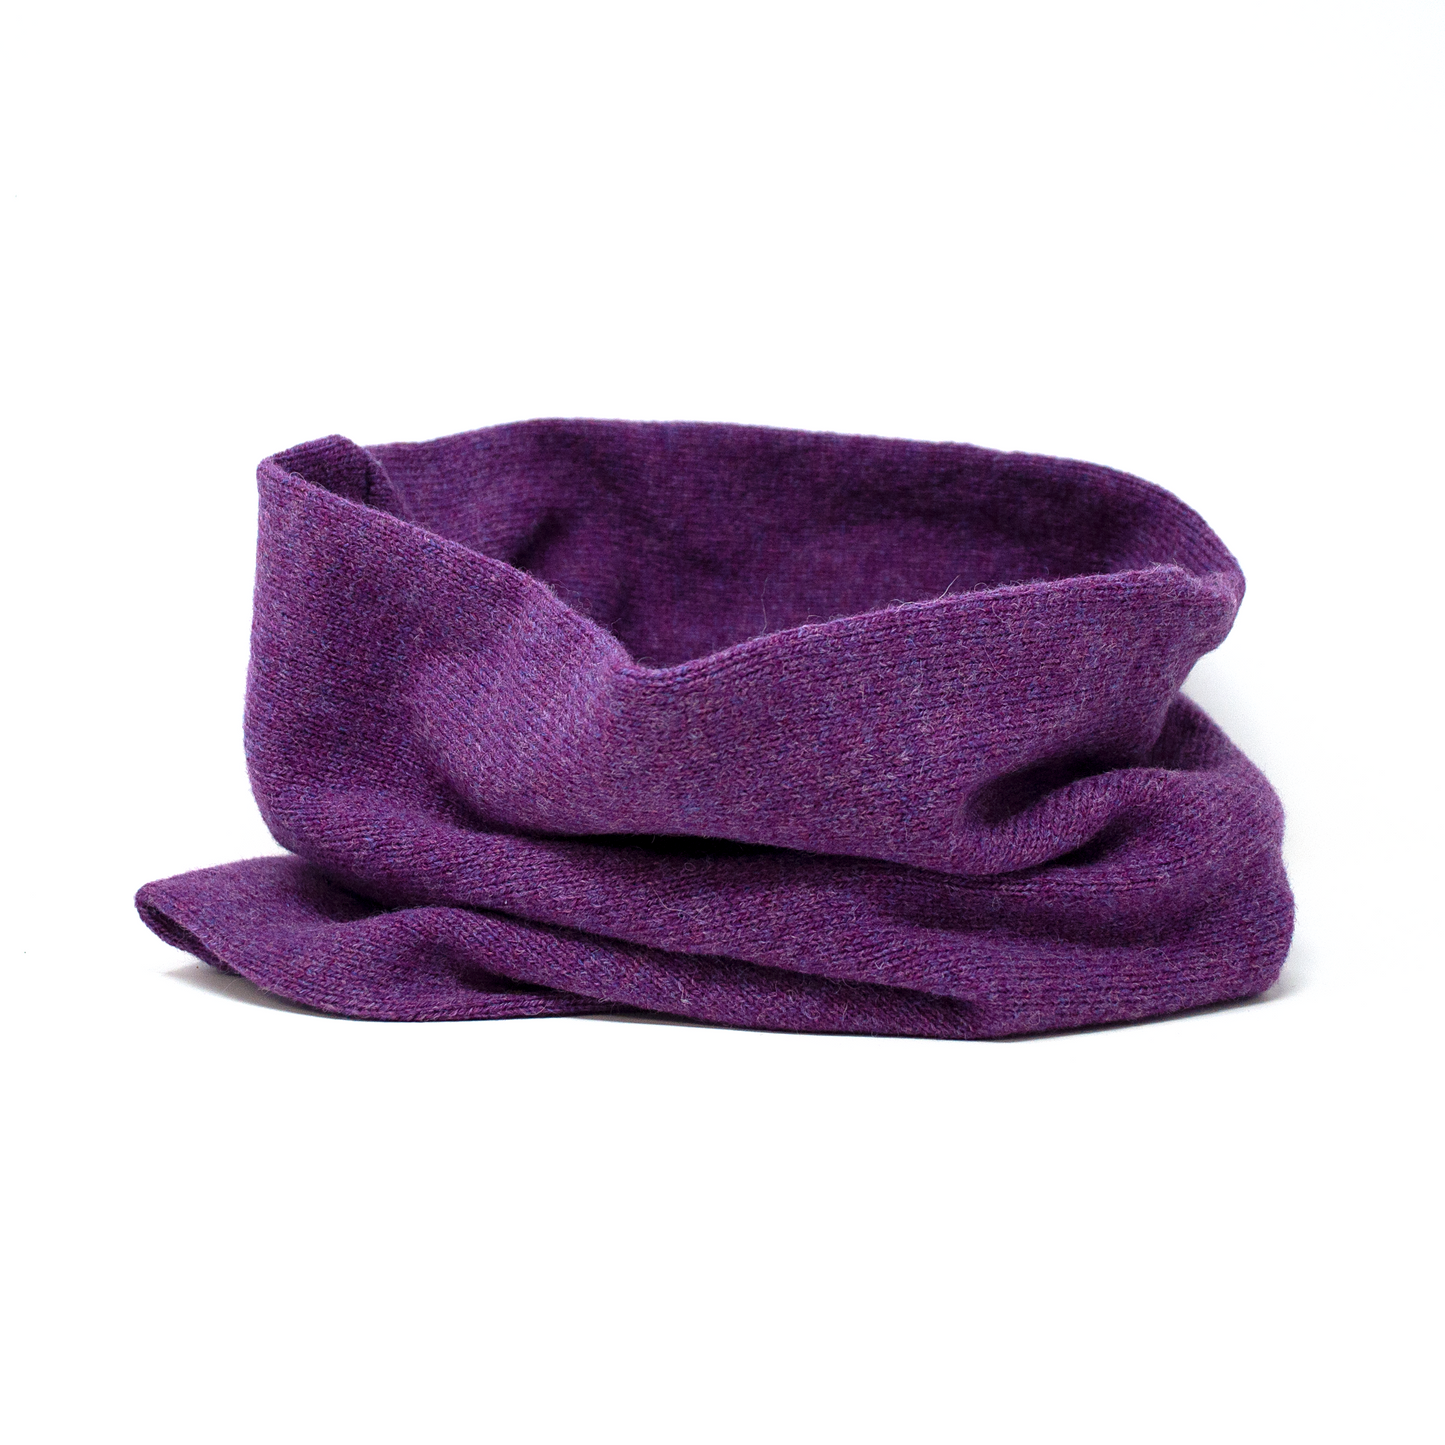 Parma - AW23 Collection - Luxury Knitted Snood